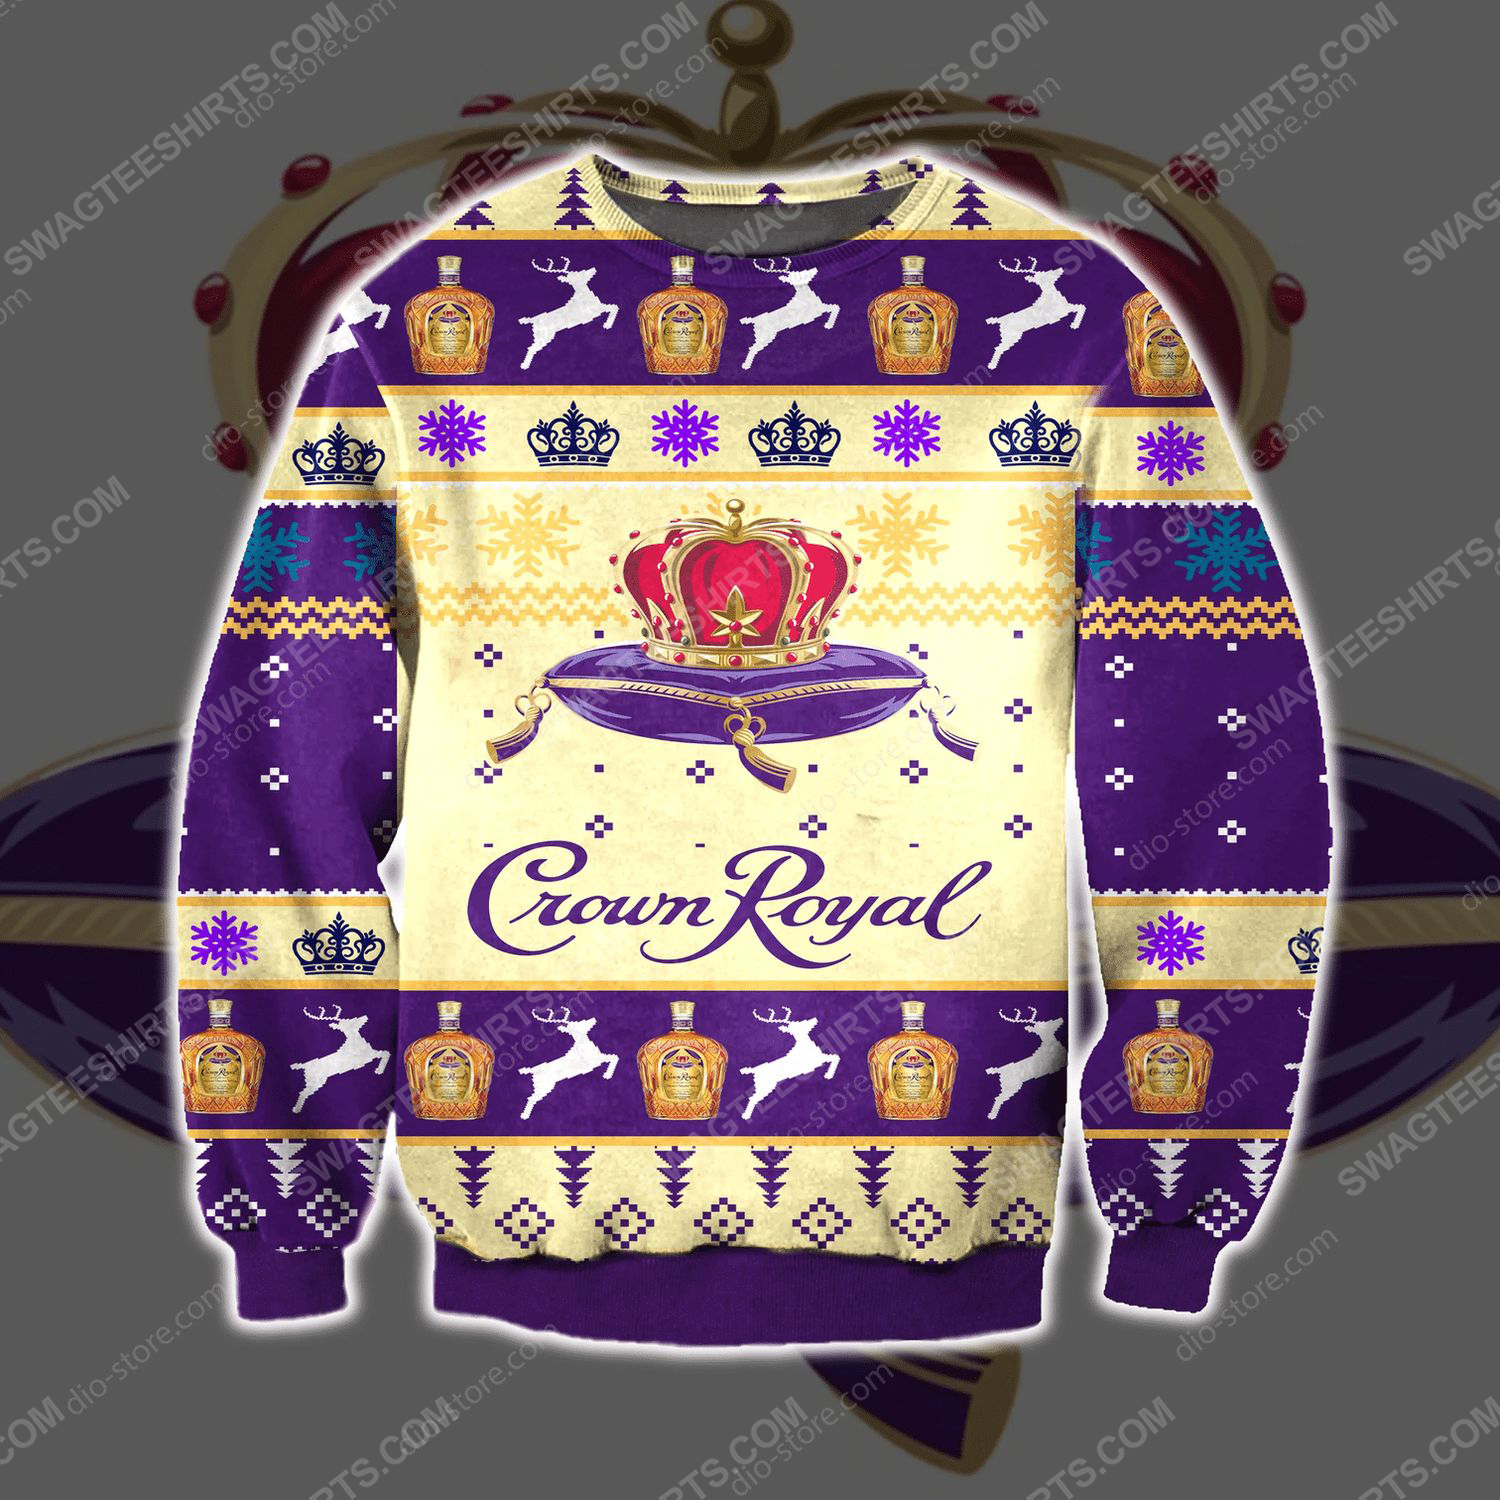 Seagram's crown royal ugly christmas sweater - Copy (2)